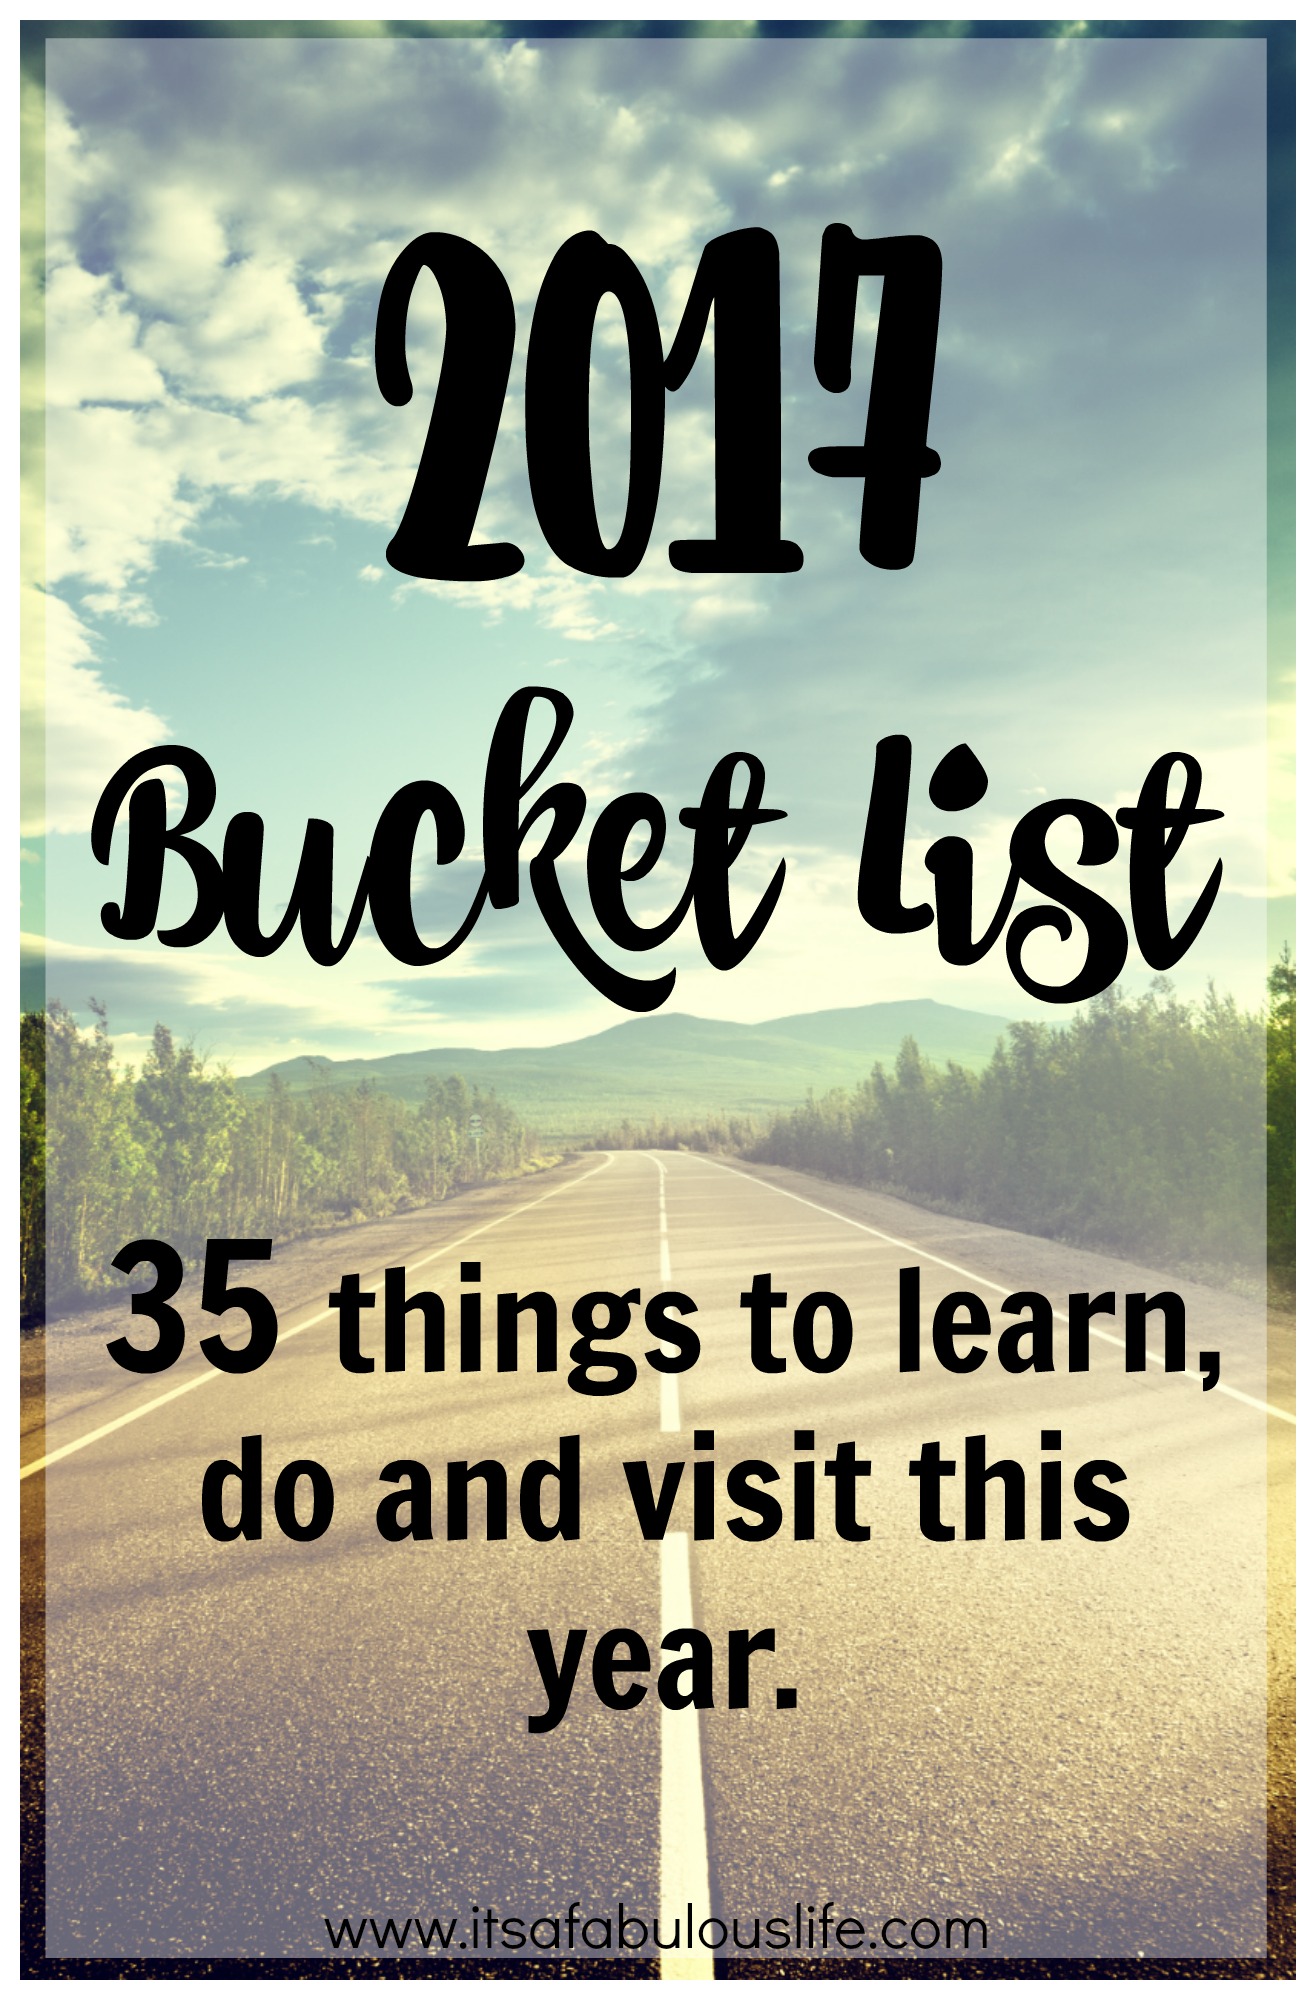 v2017 Bucket List: 35 Things to learn, do and visit this year